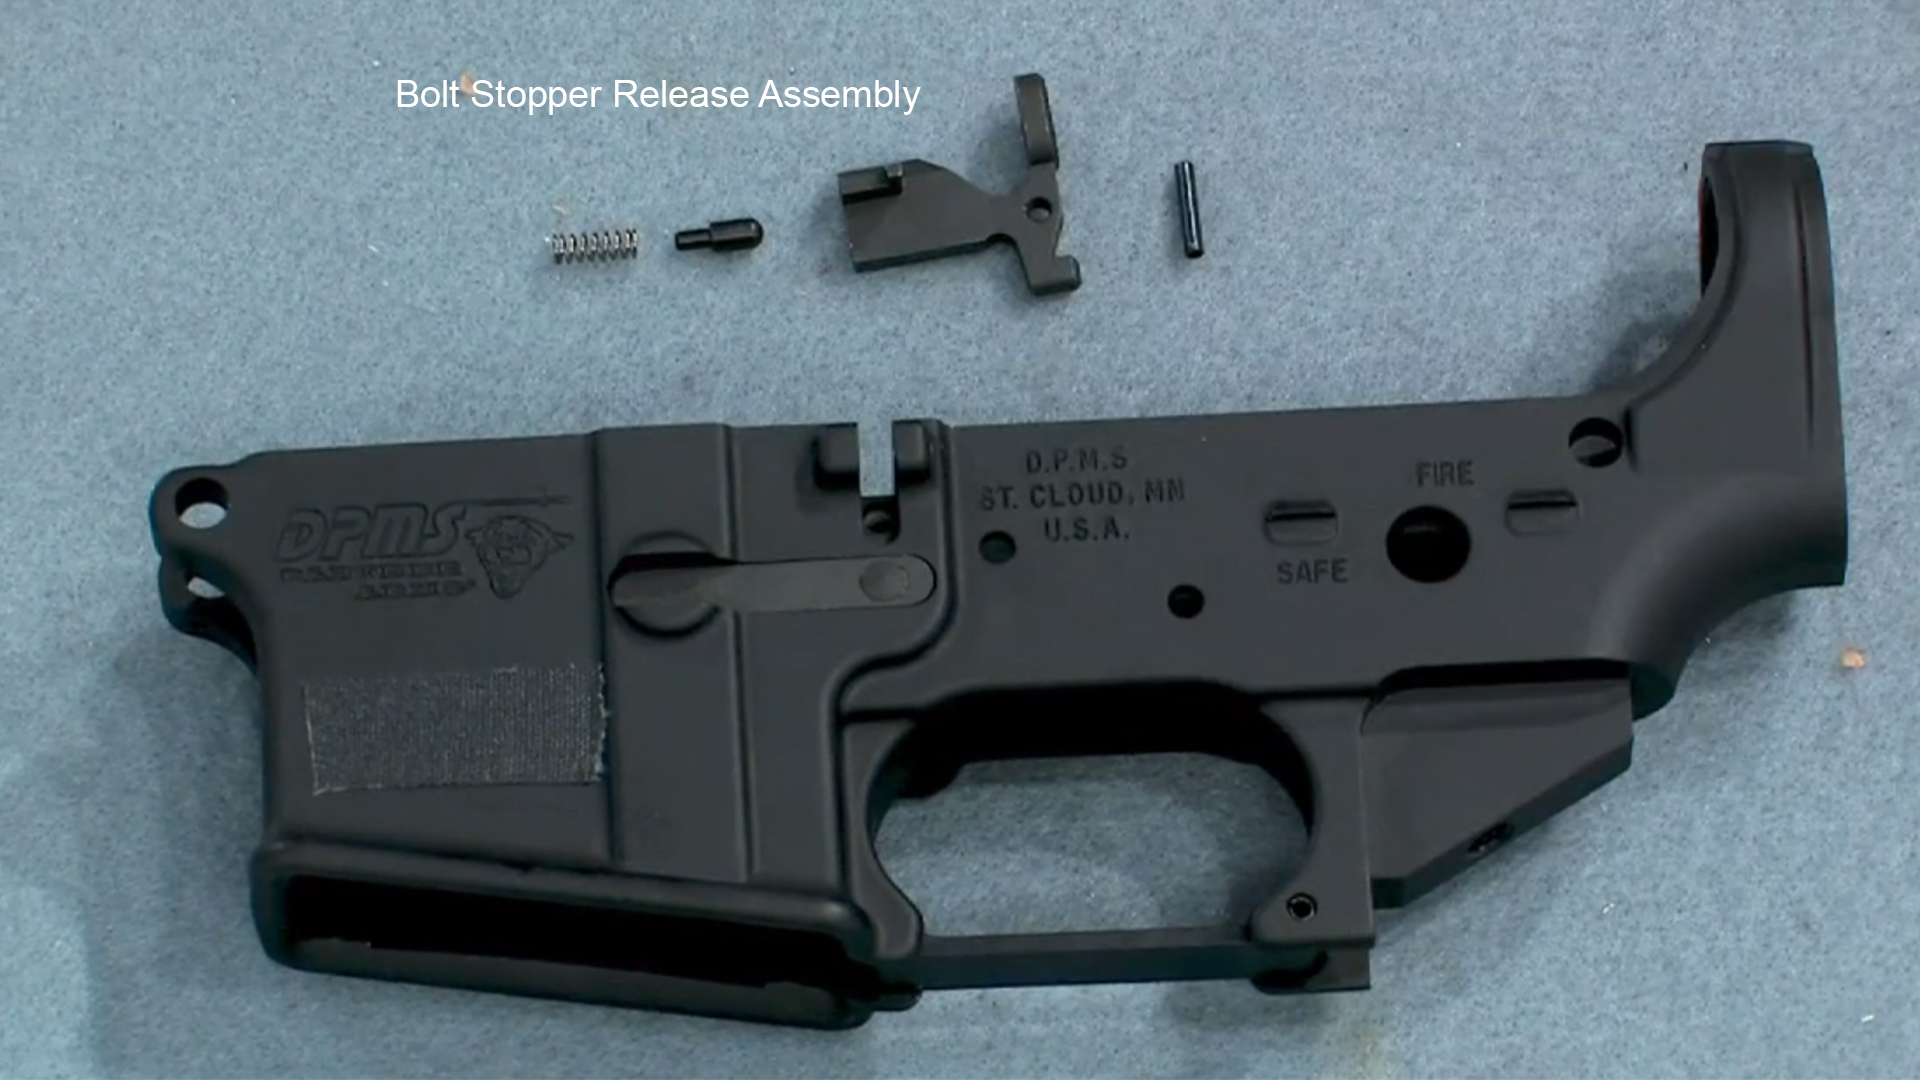 Image relating to How to Build an AR-15 Lower Receiver